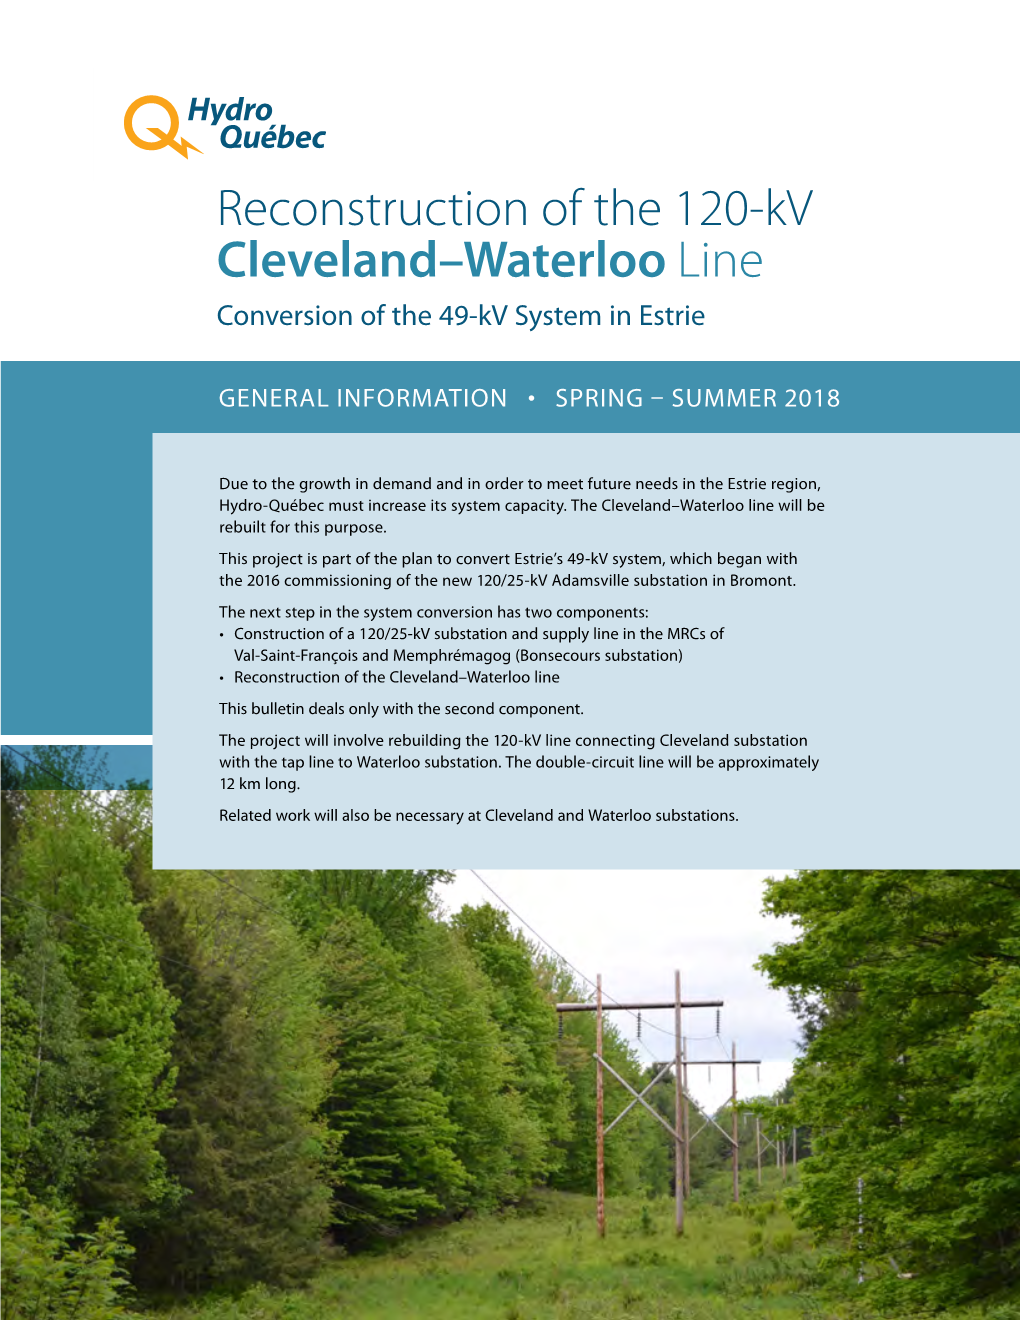 Cleveland–Waterloo Line Conversion of the 49-Kv System in Estrie